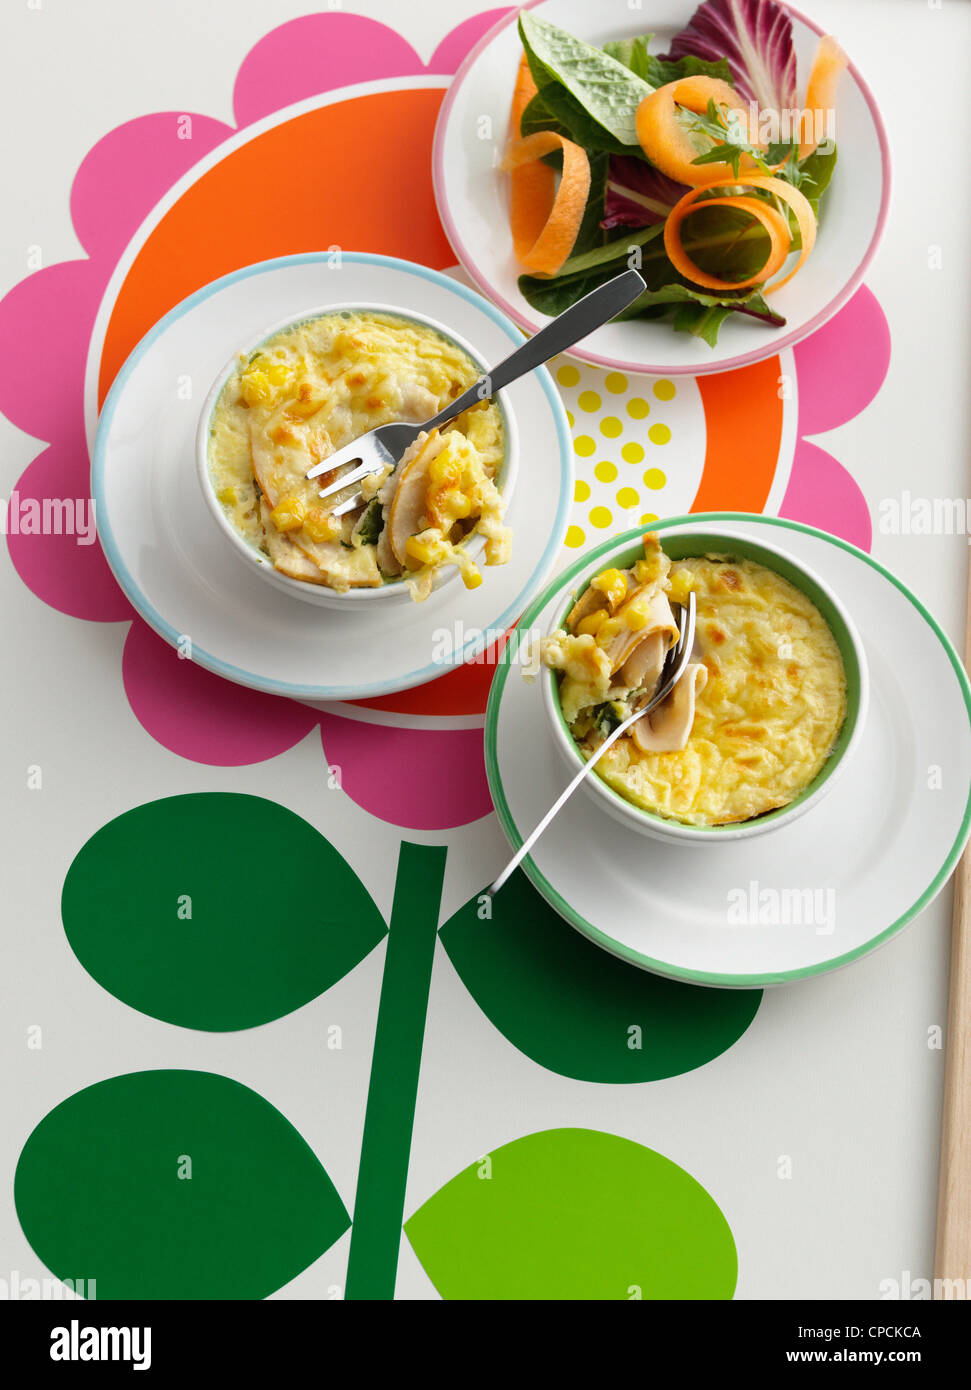 Bowls of baked macaroni and cheese Stock Photo